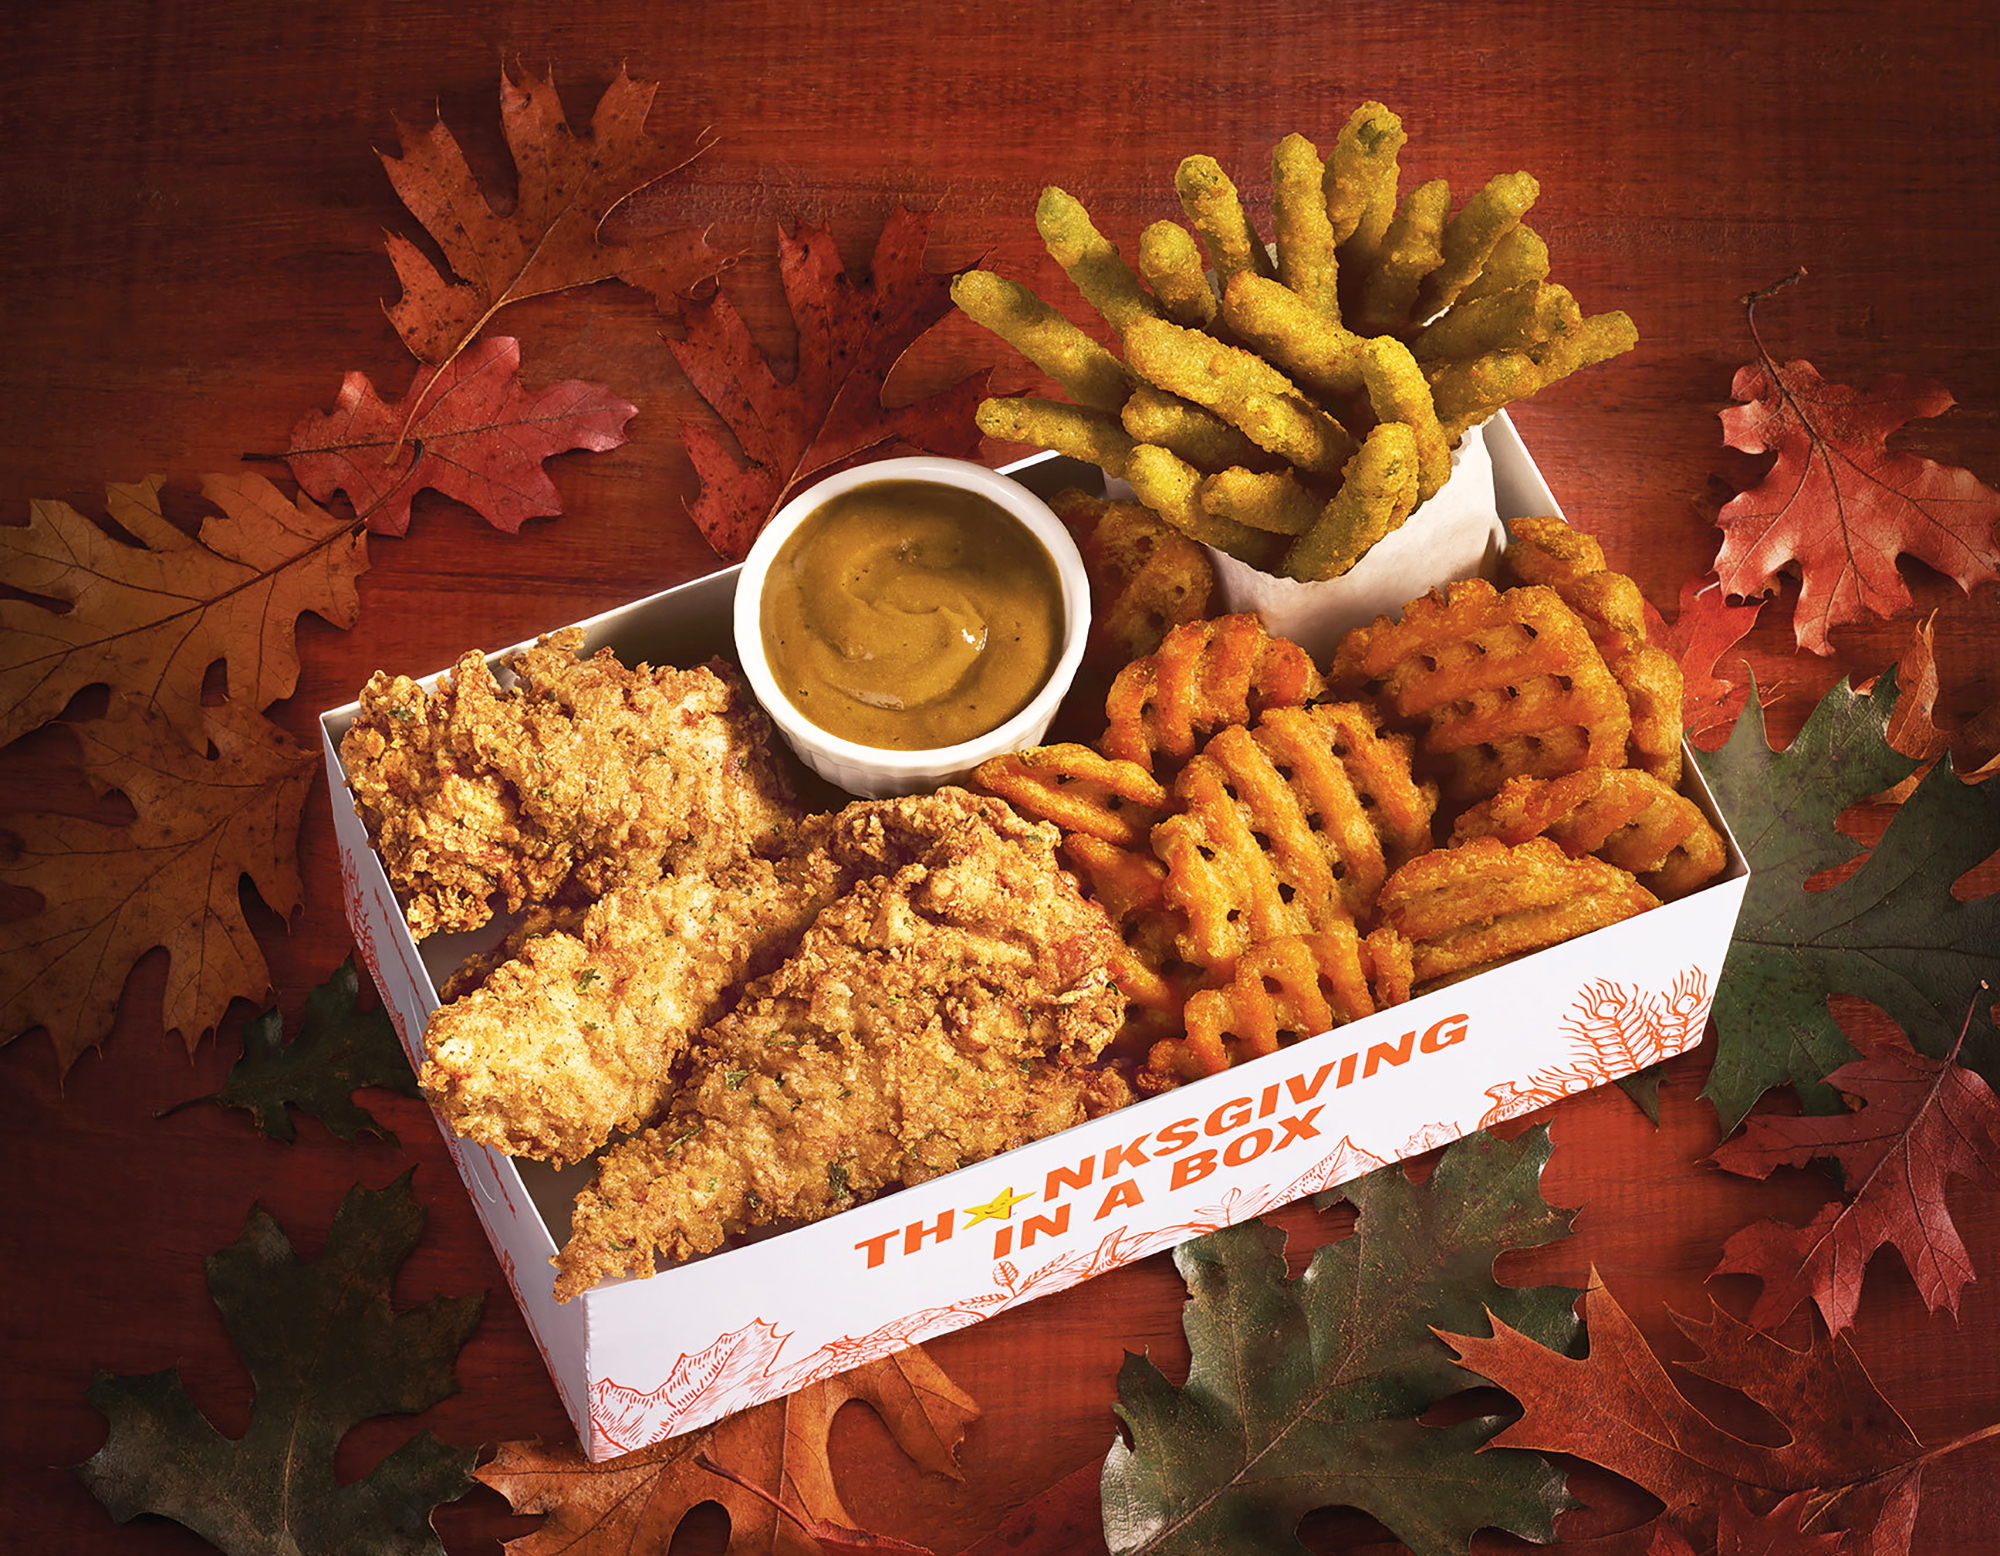 Thanksgiving in a Box will available from Wednesday until Dec. 3.